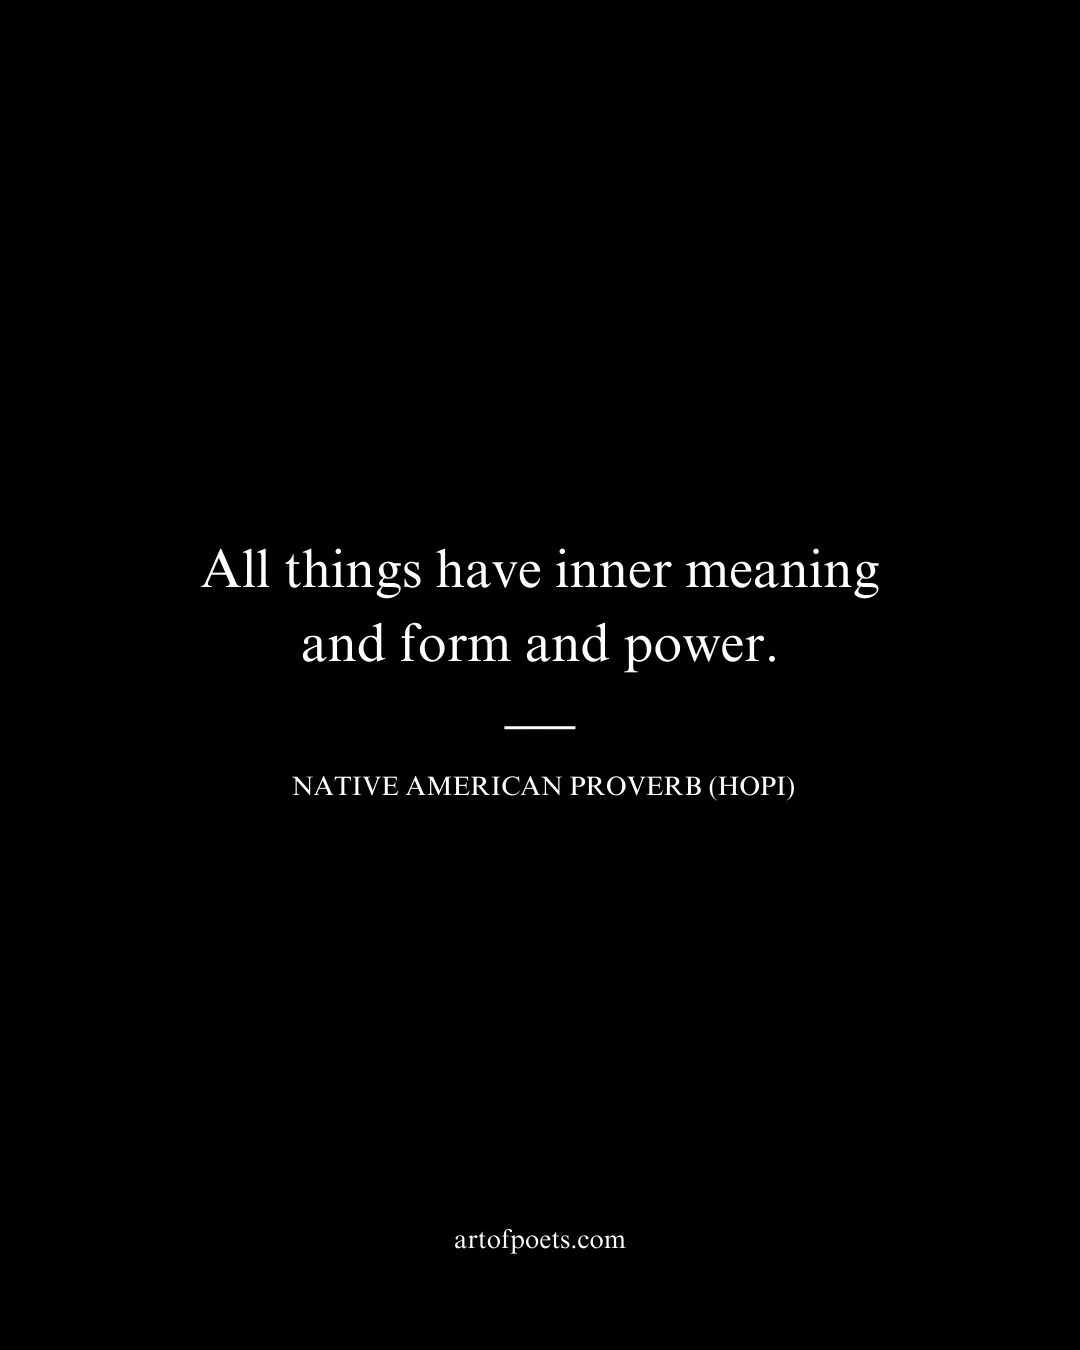 All things have inner meaning and form and power